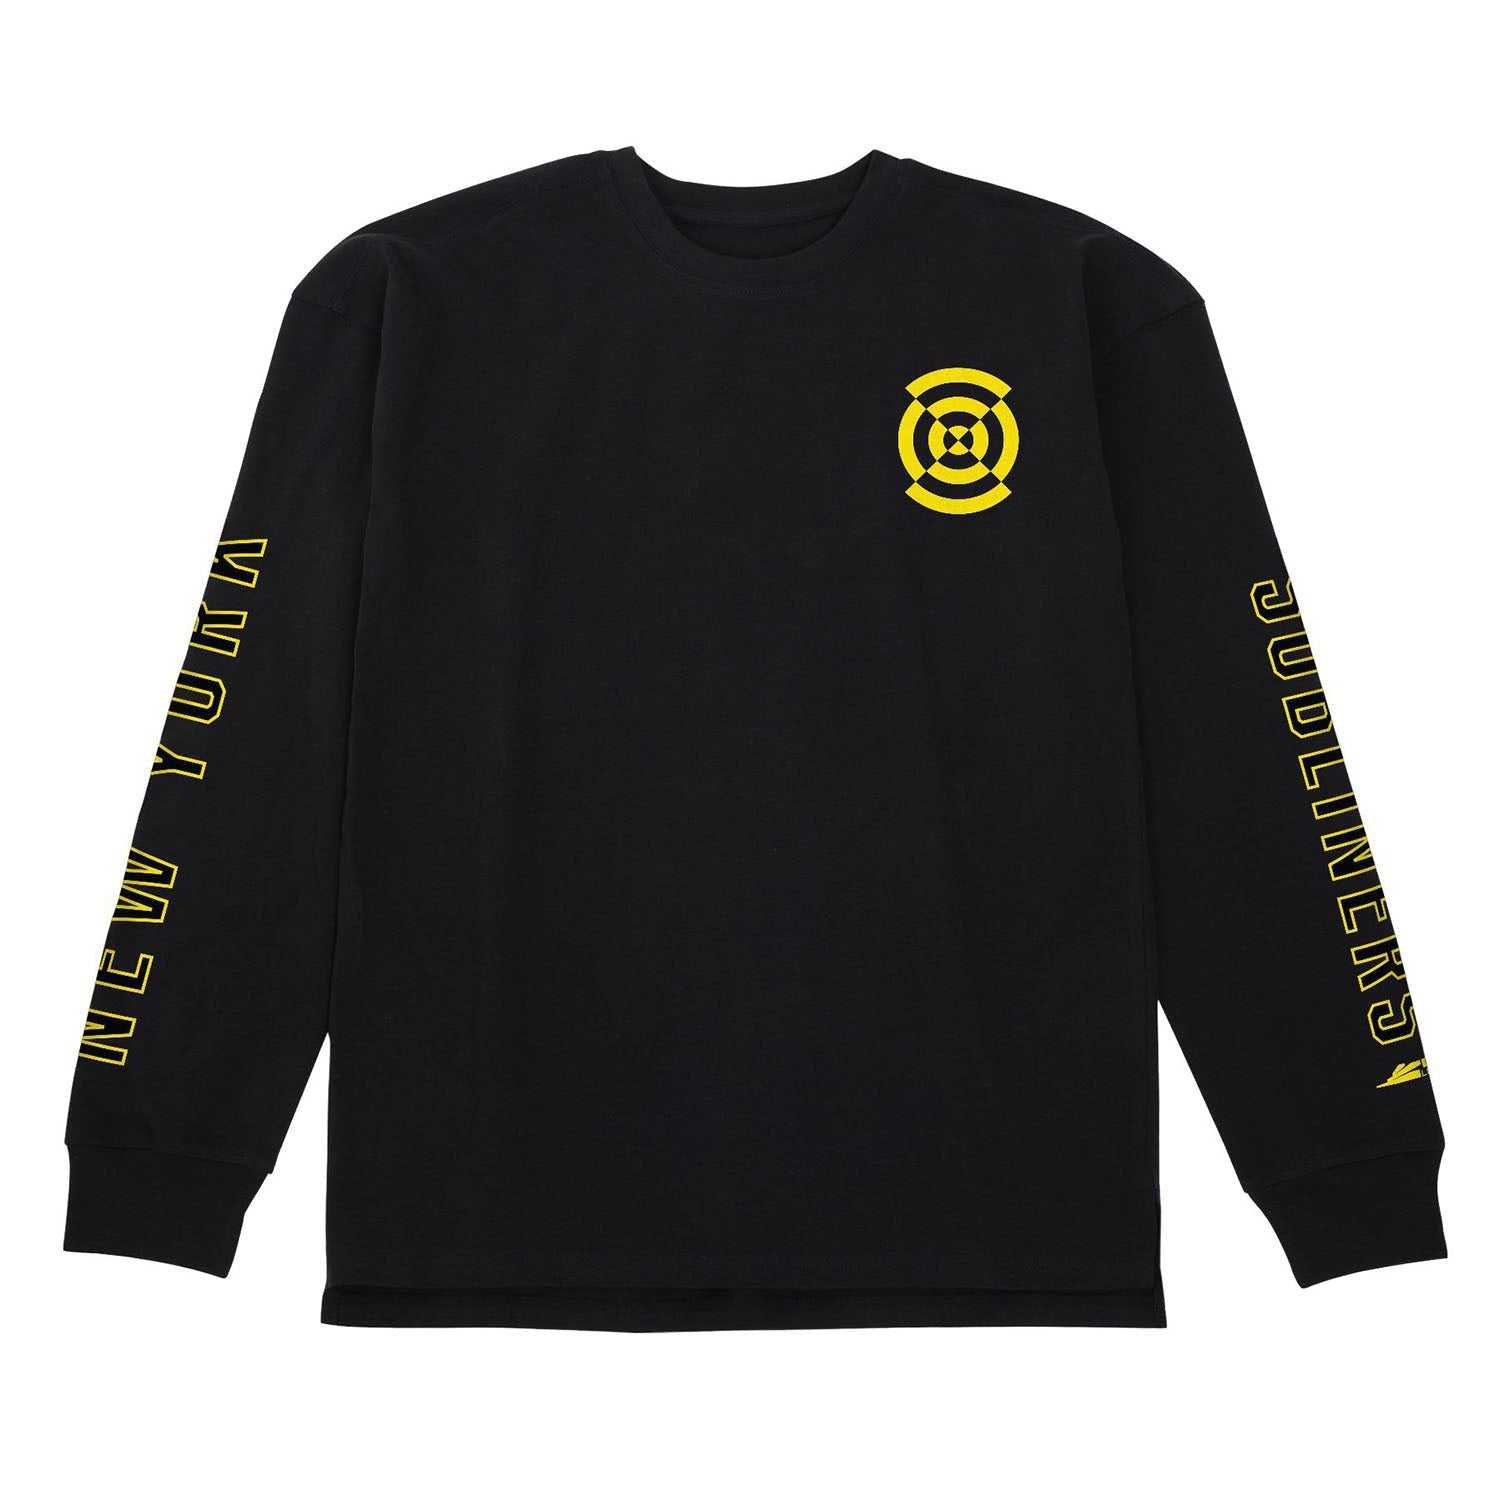 New York Subliners Black Heavyweight Long Sleeve T-Shirt - Front View